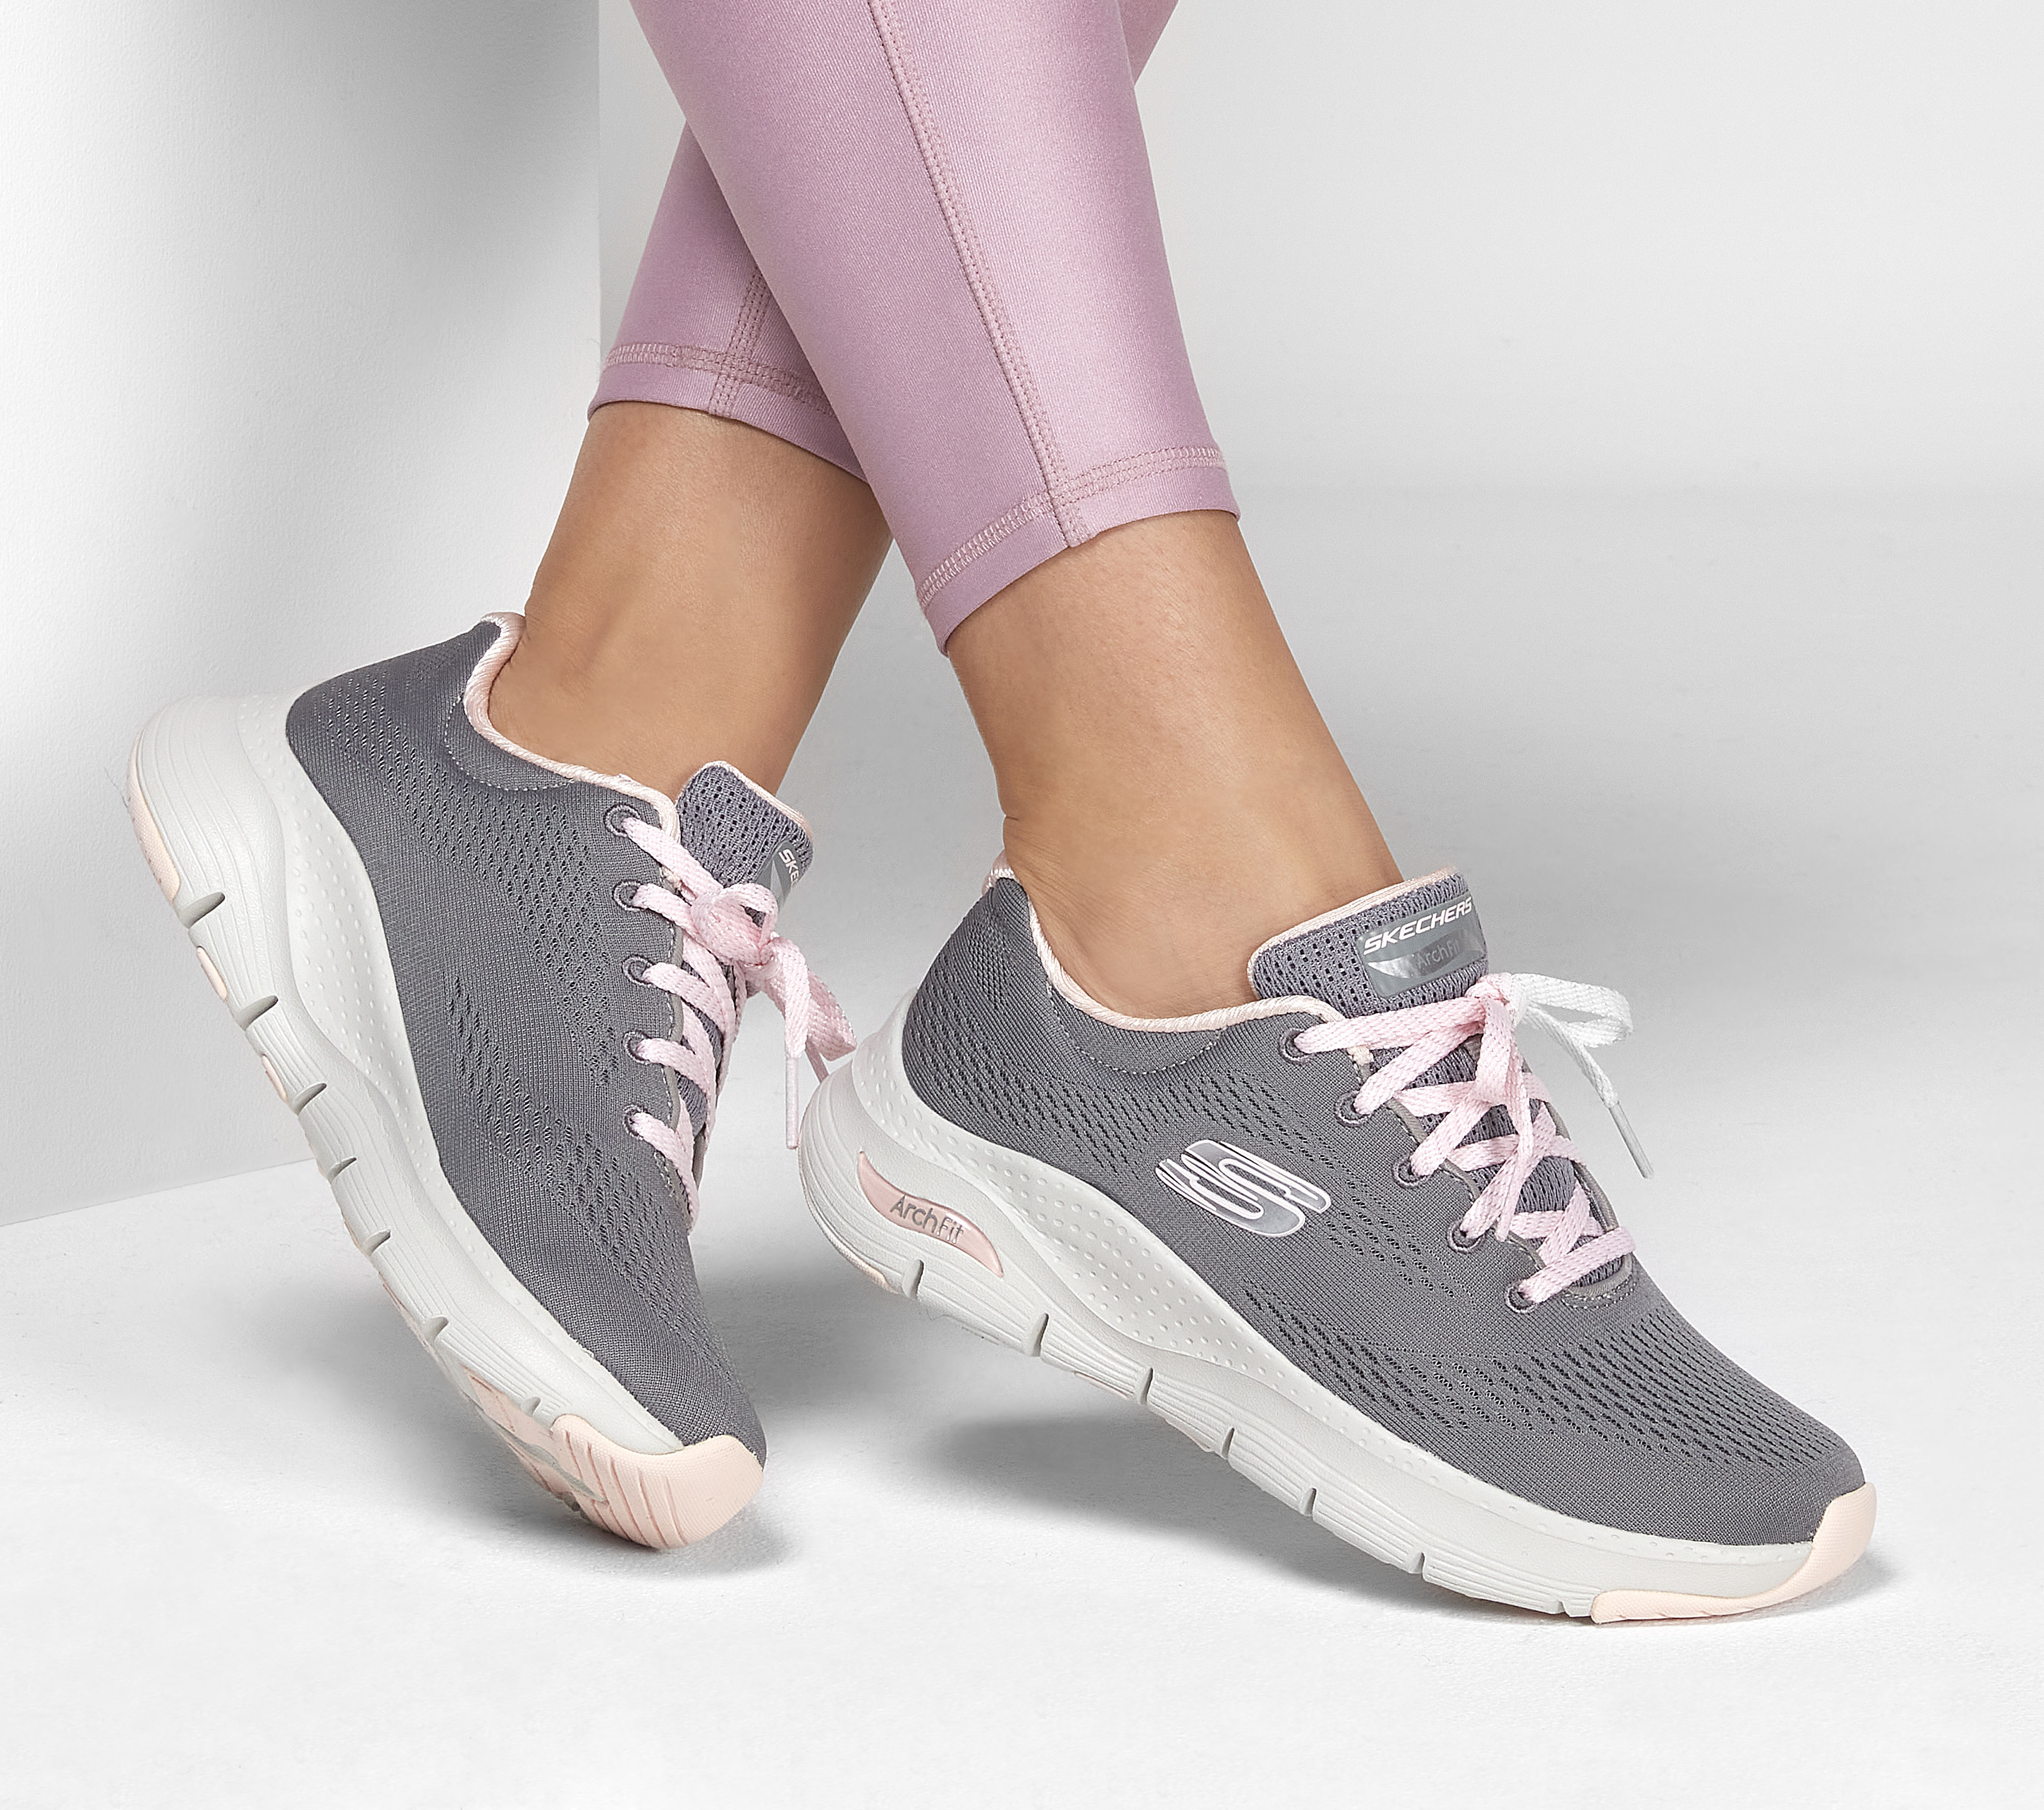 Skechers With Good Arch Support Online 